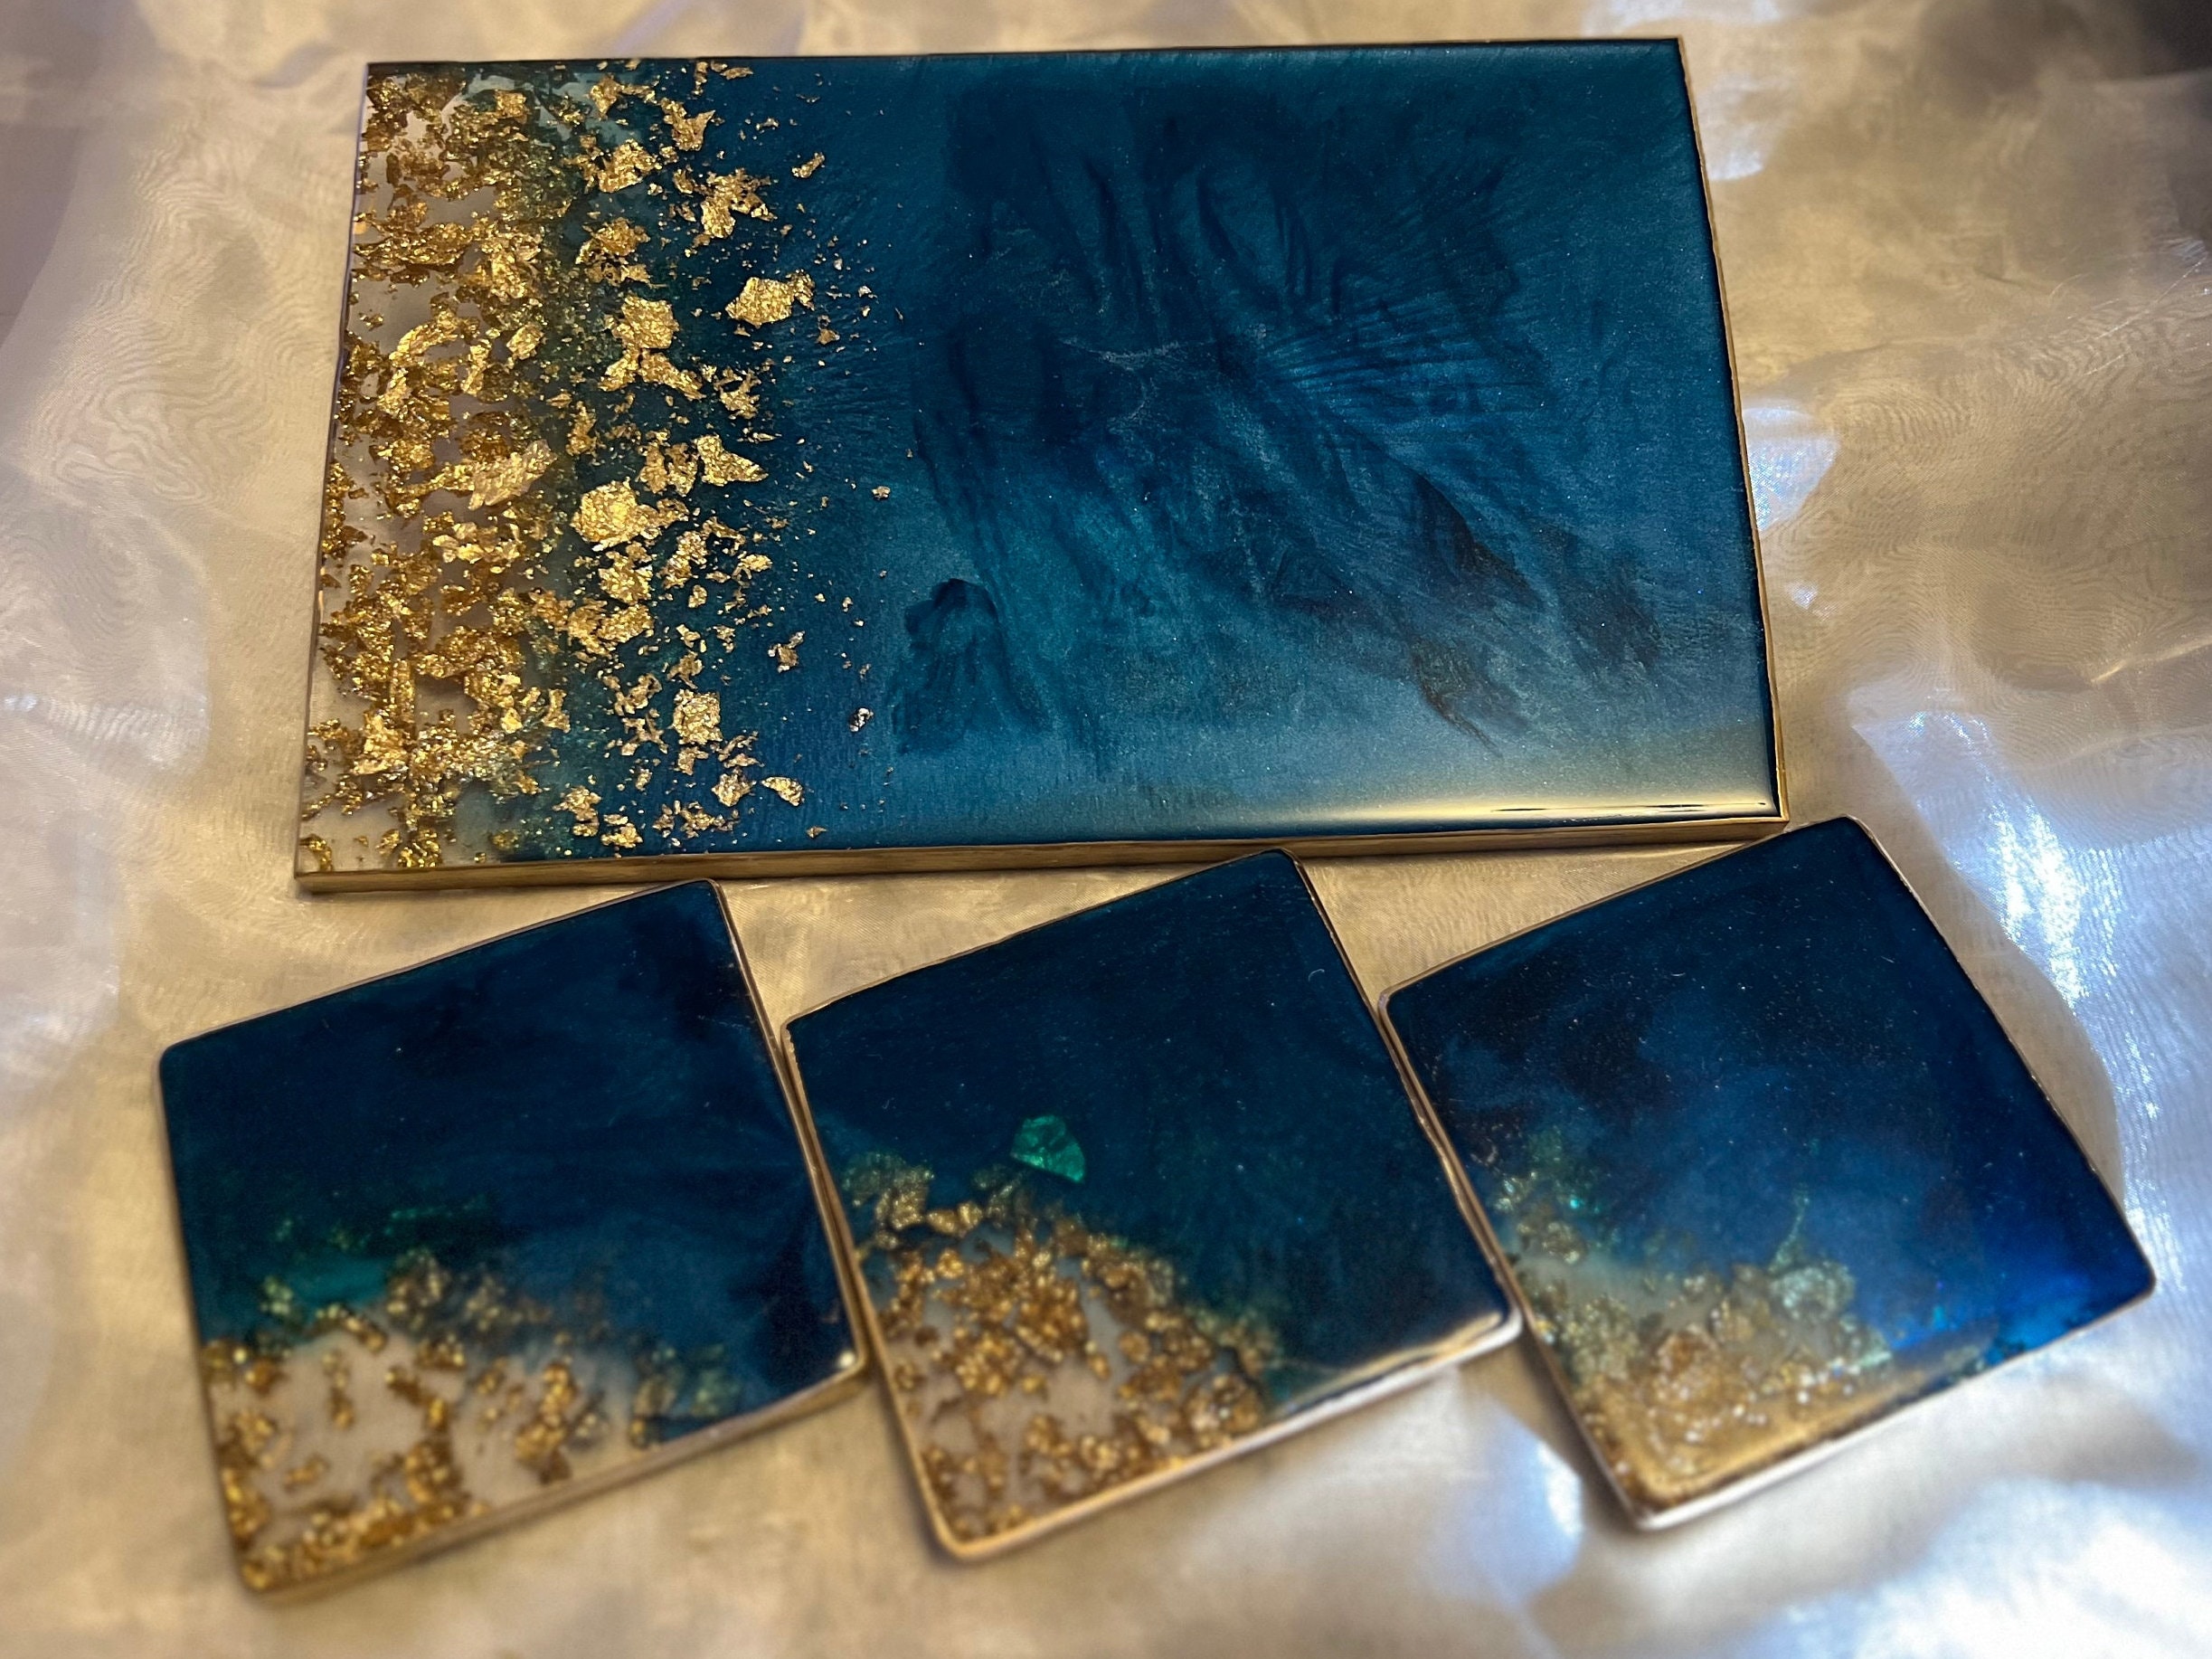 Hexagon Circle Square Glitter Resin Coasters Silver Rose Gold Gold Blue and  More Colors Available Personalized Gifts Gift for Her Epoxy Gift 